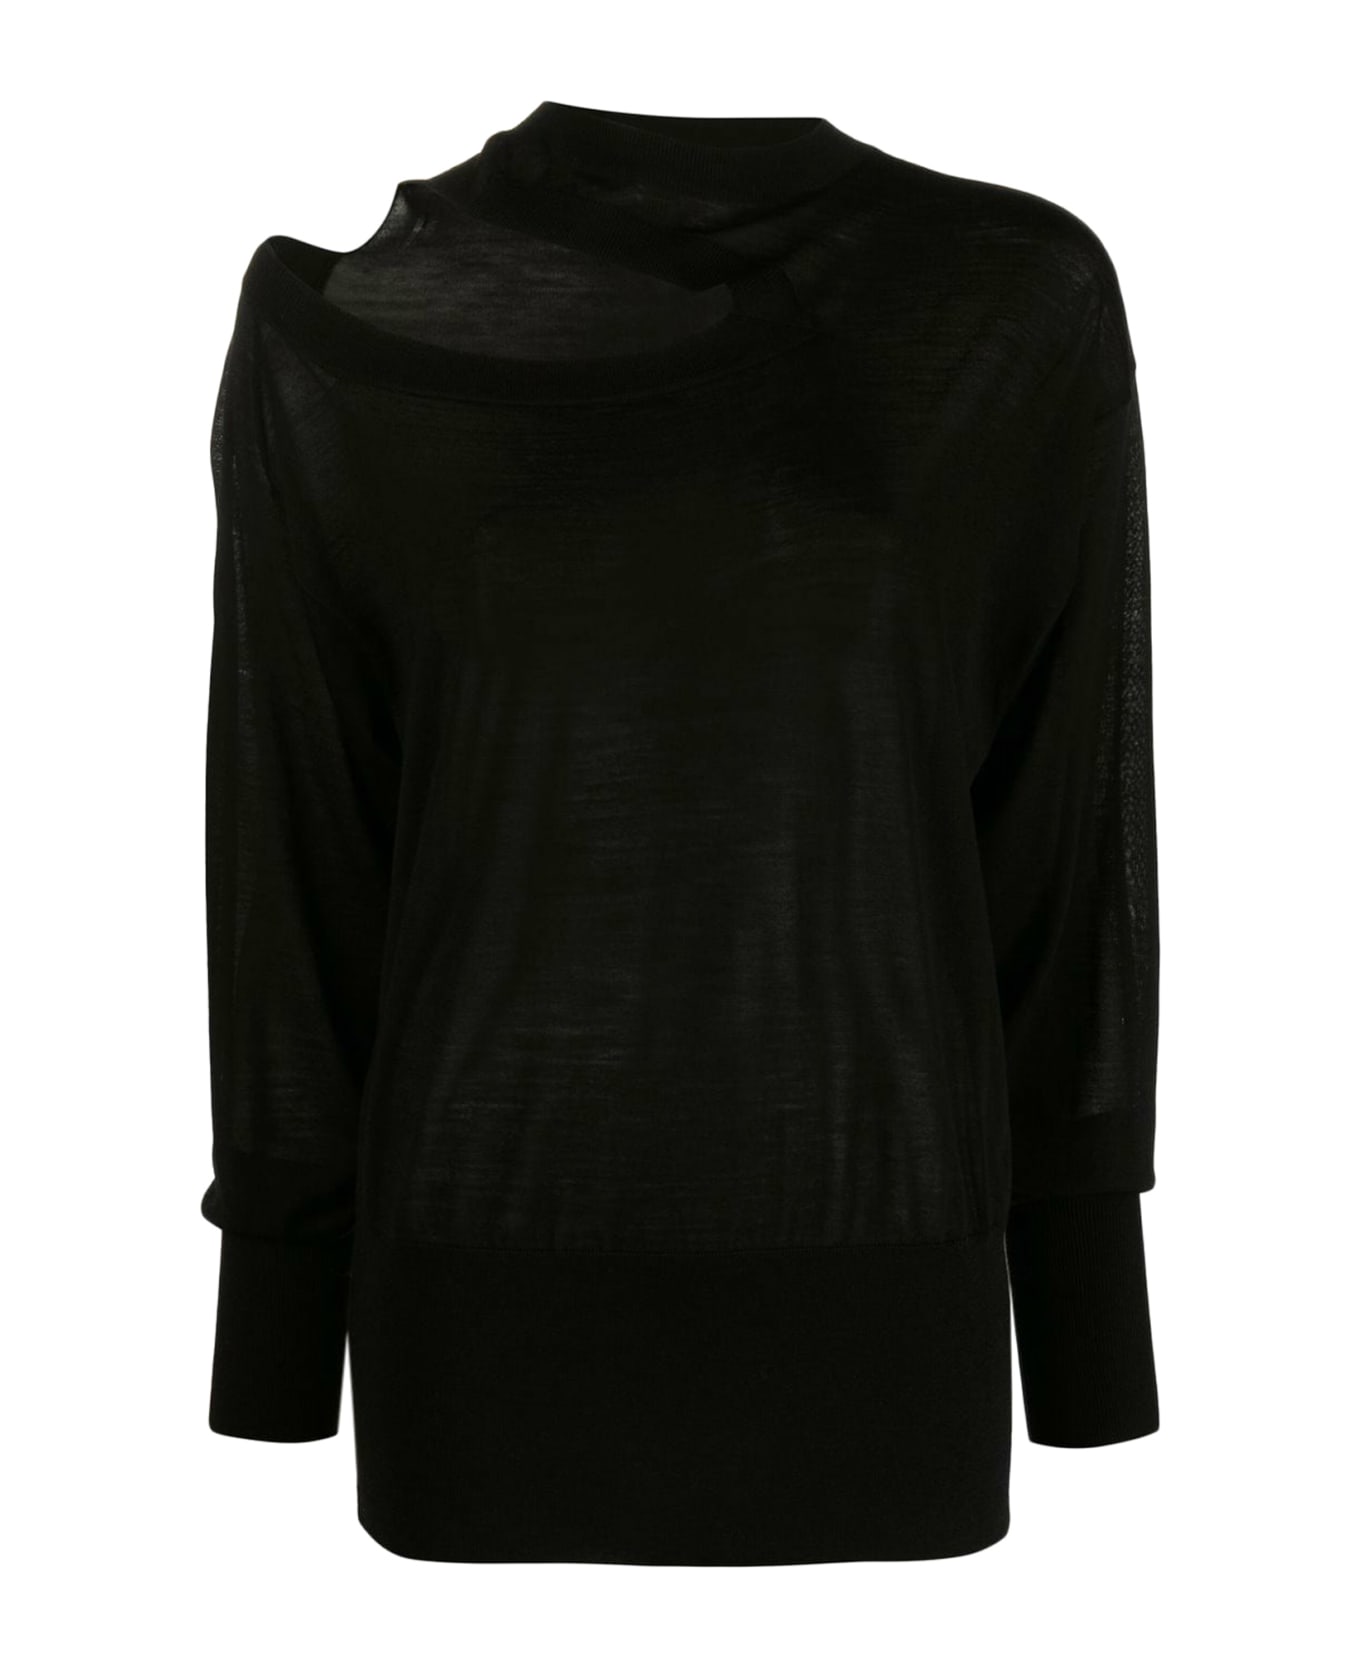 Stella McCartney Cut Out-detail Crewneck Knitted Top - Black